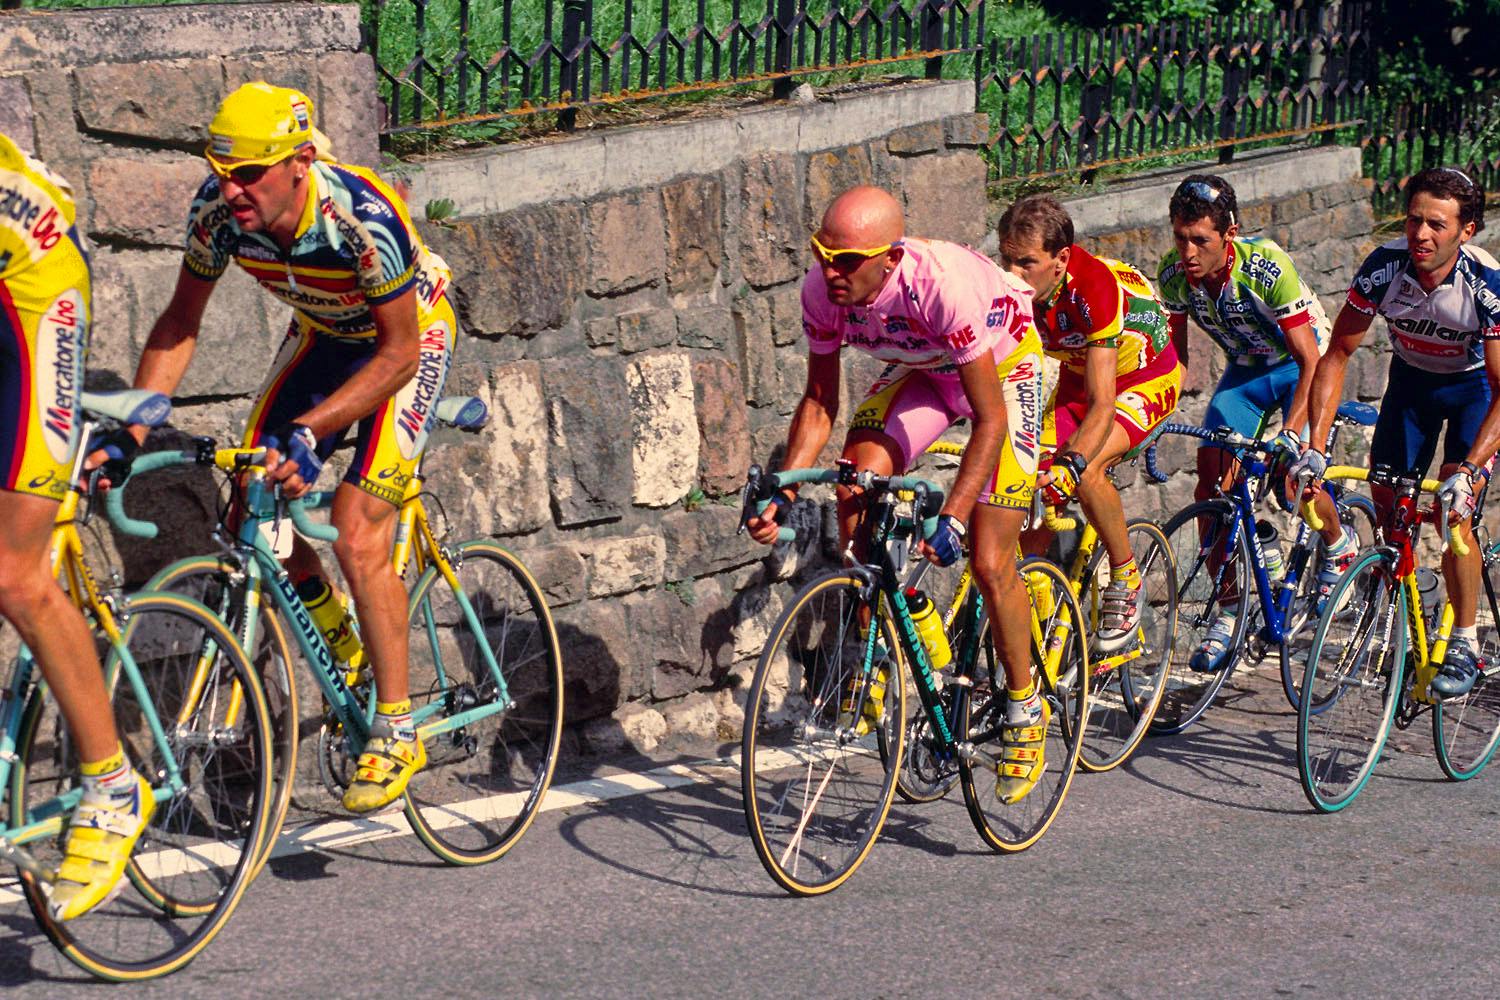 Some road cyclists are racing up a hill. They all have yellow shoes on and some of them are standing up while pedaling. 